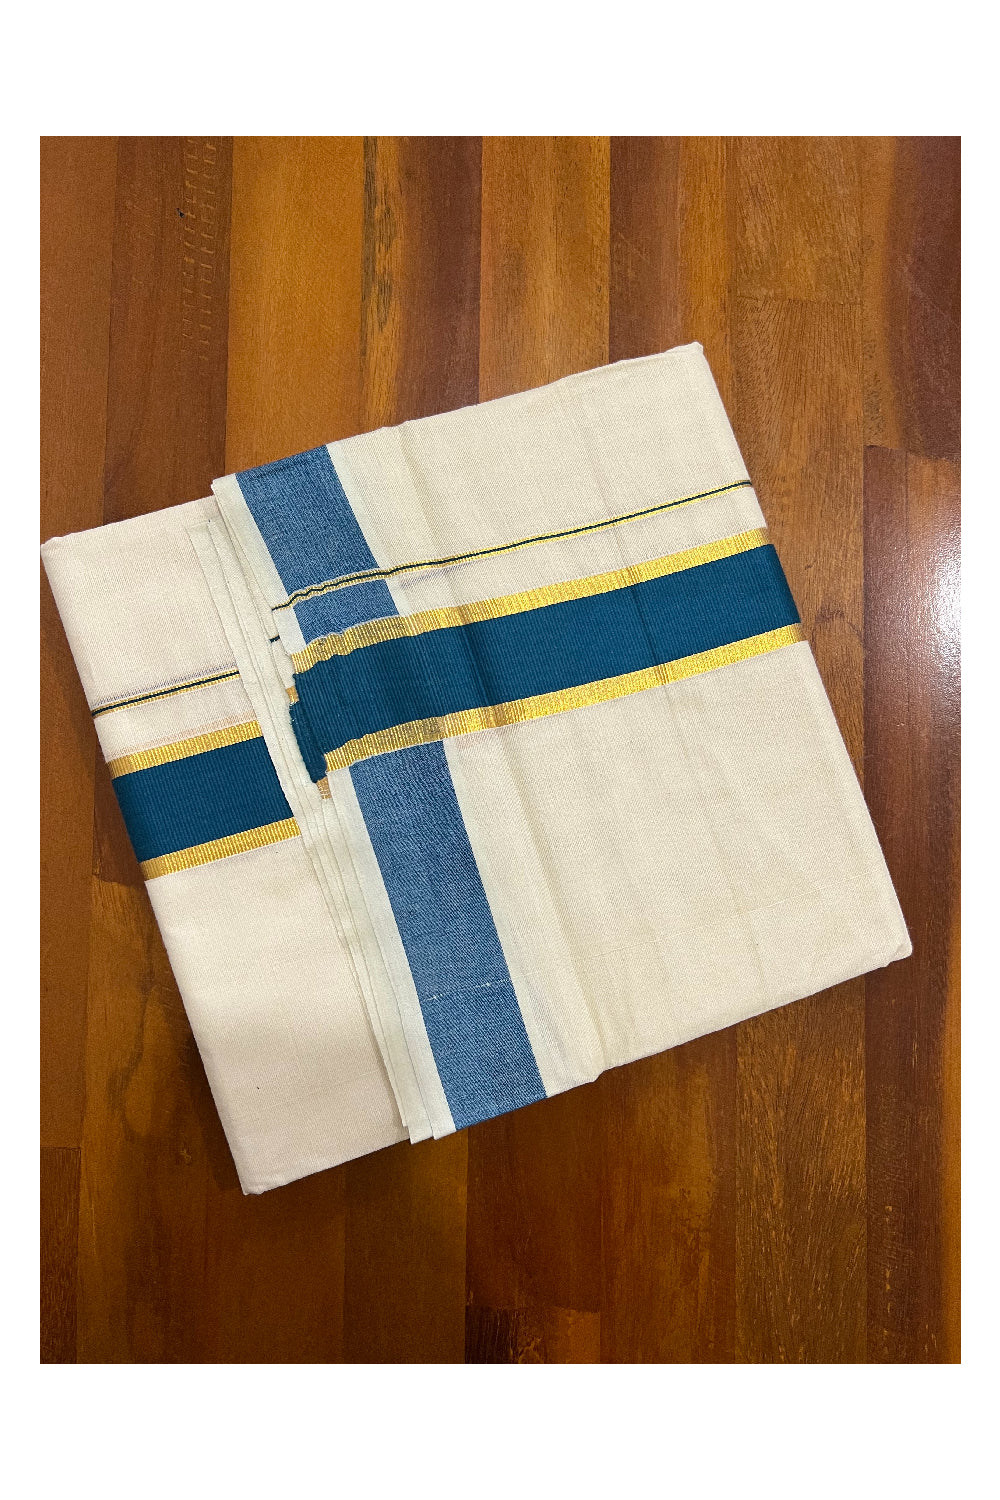 Off White Kerala Double Mundu with Kasavu and Teal Green Border (South Indian Dhoti)